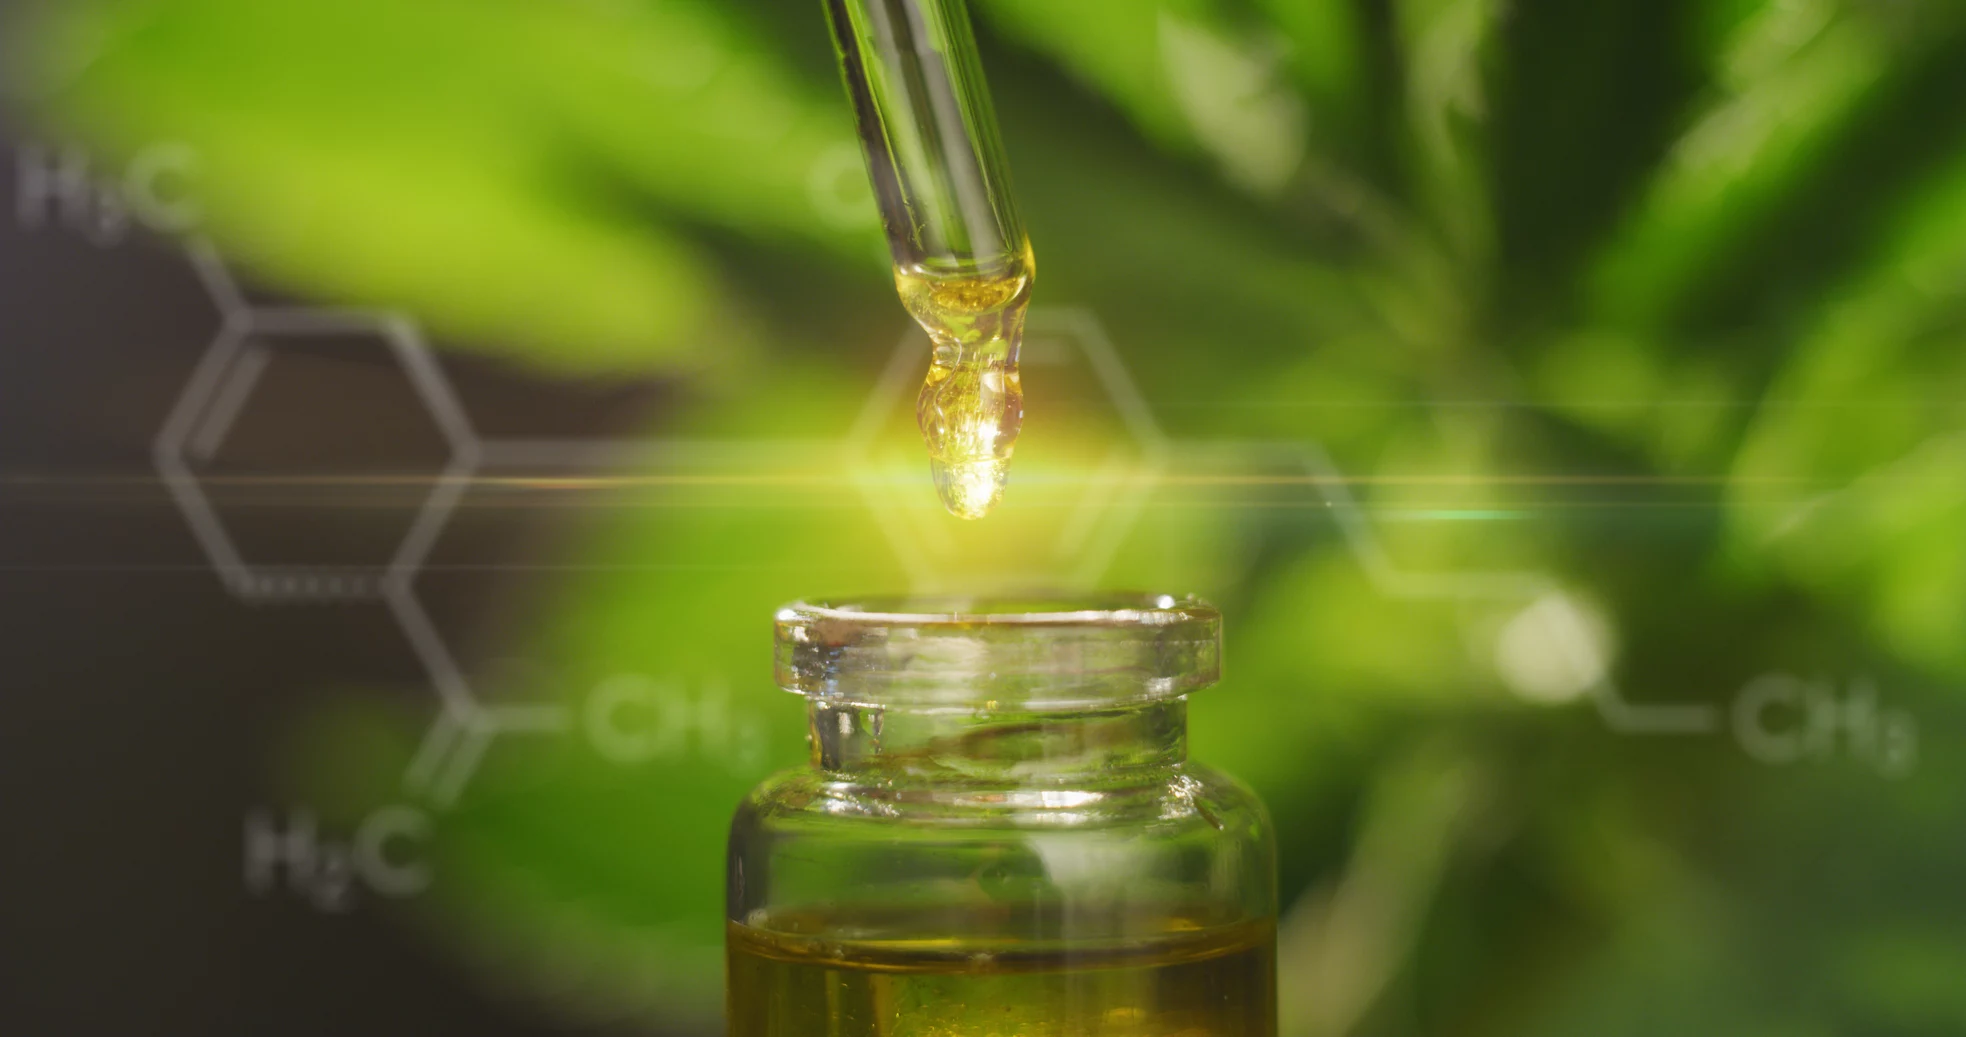 Younger Individuals Are More Likely to Use CBD to Treat Chronic Pain